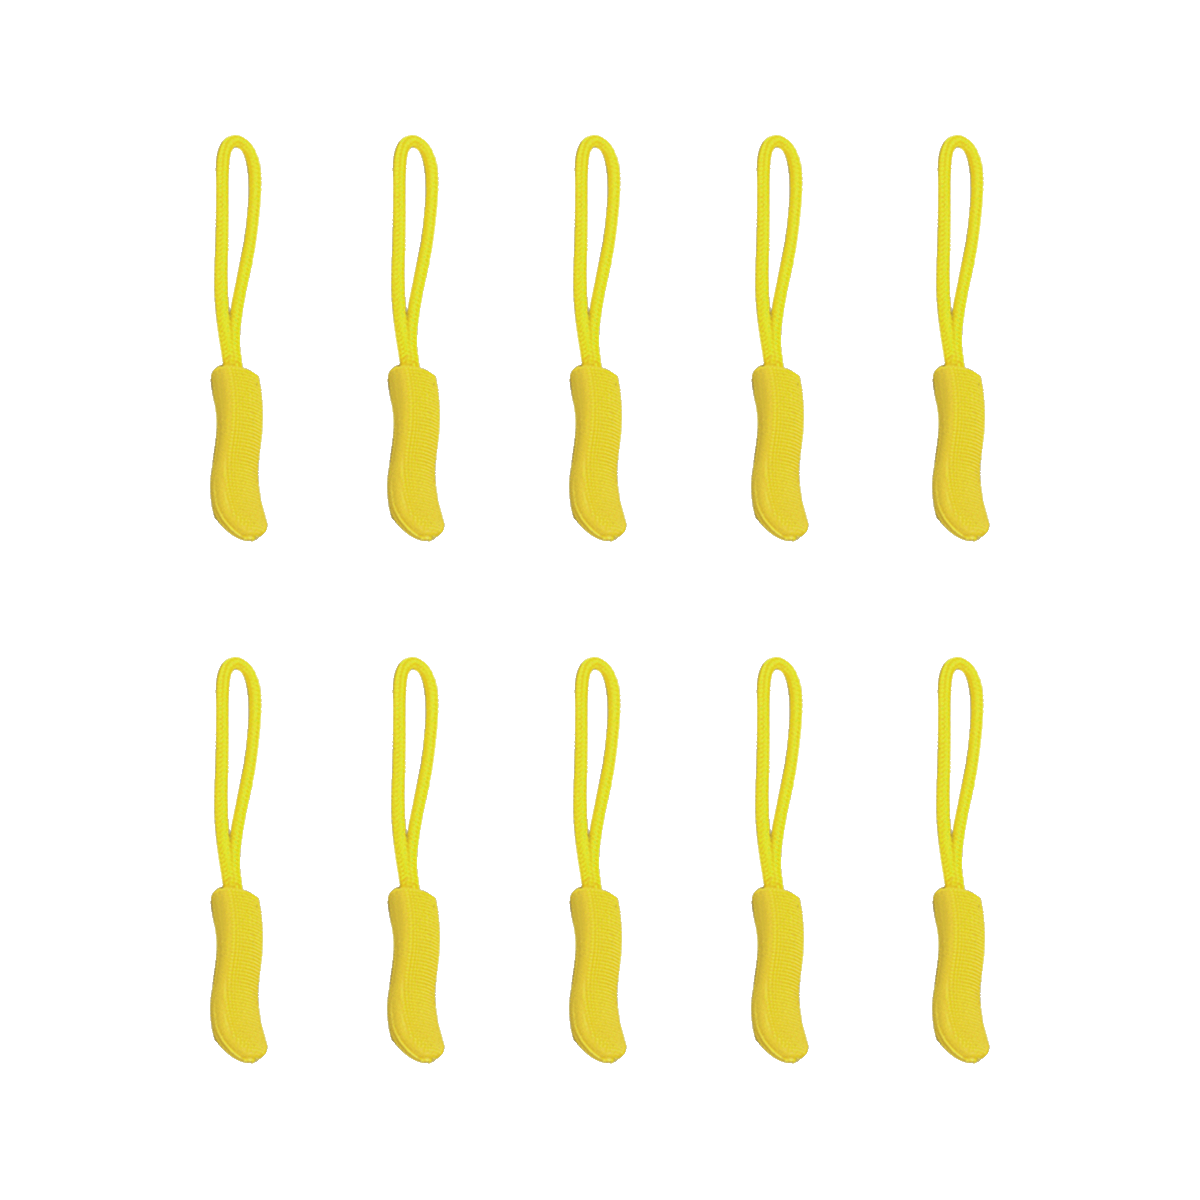 Premium Zipper Pull Replacement, 10PCS Zipper Tab Tags Cord Extension Fixer  for Luggage, Backpacks, Jackets, Purses, Handbags , Orange